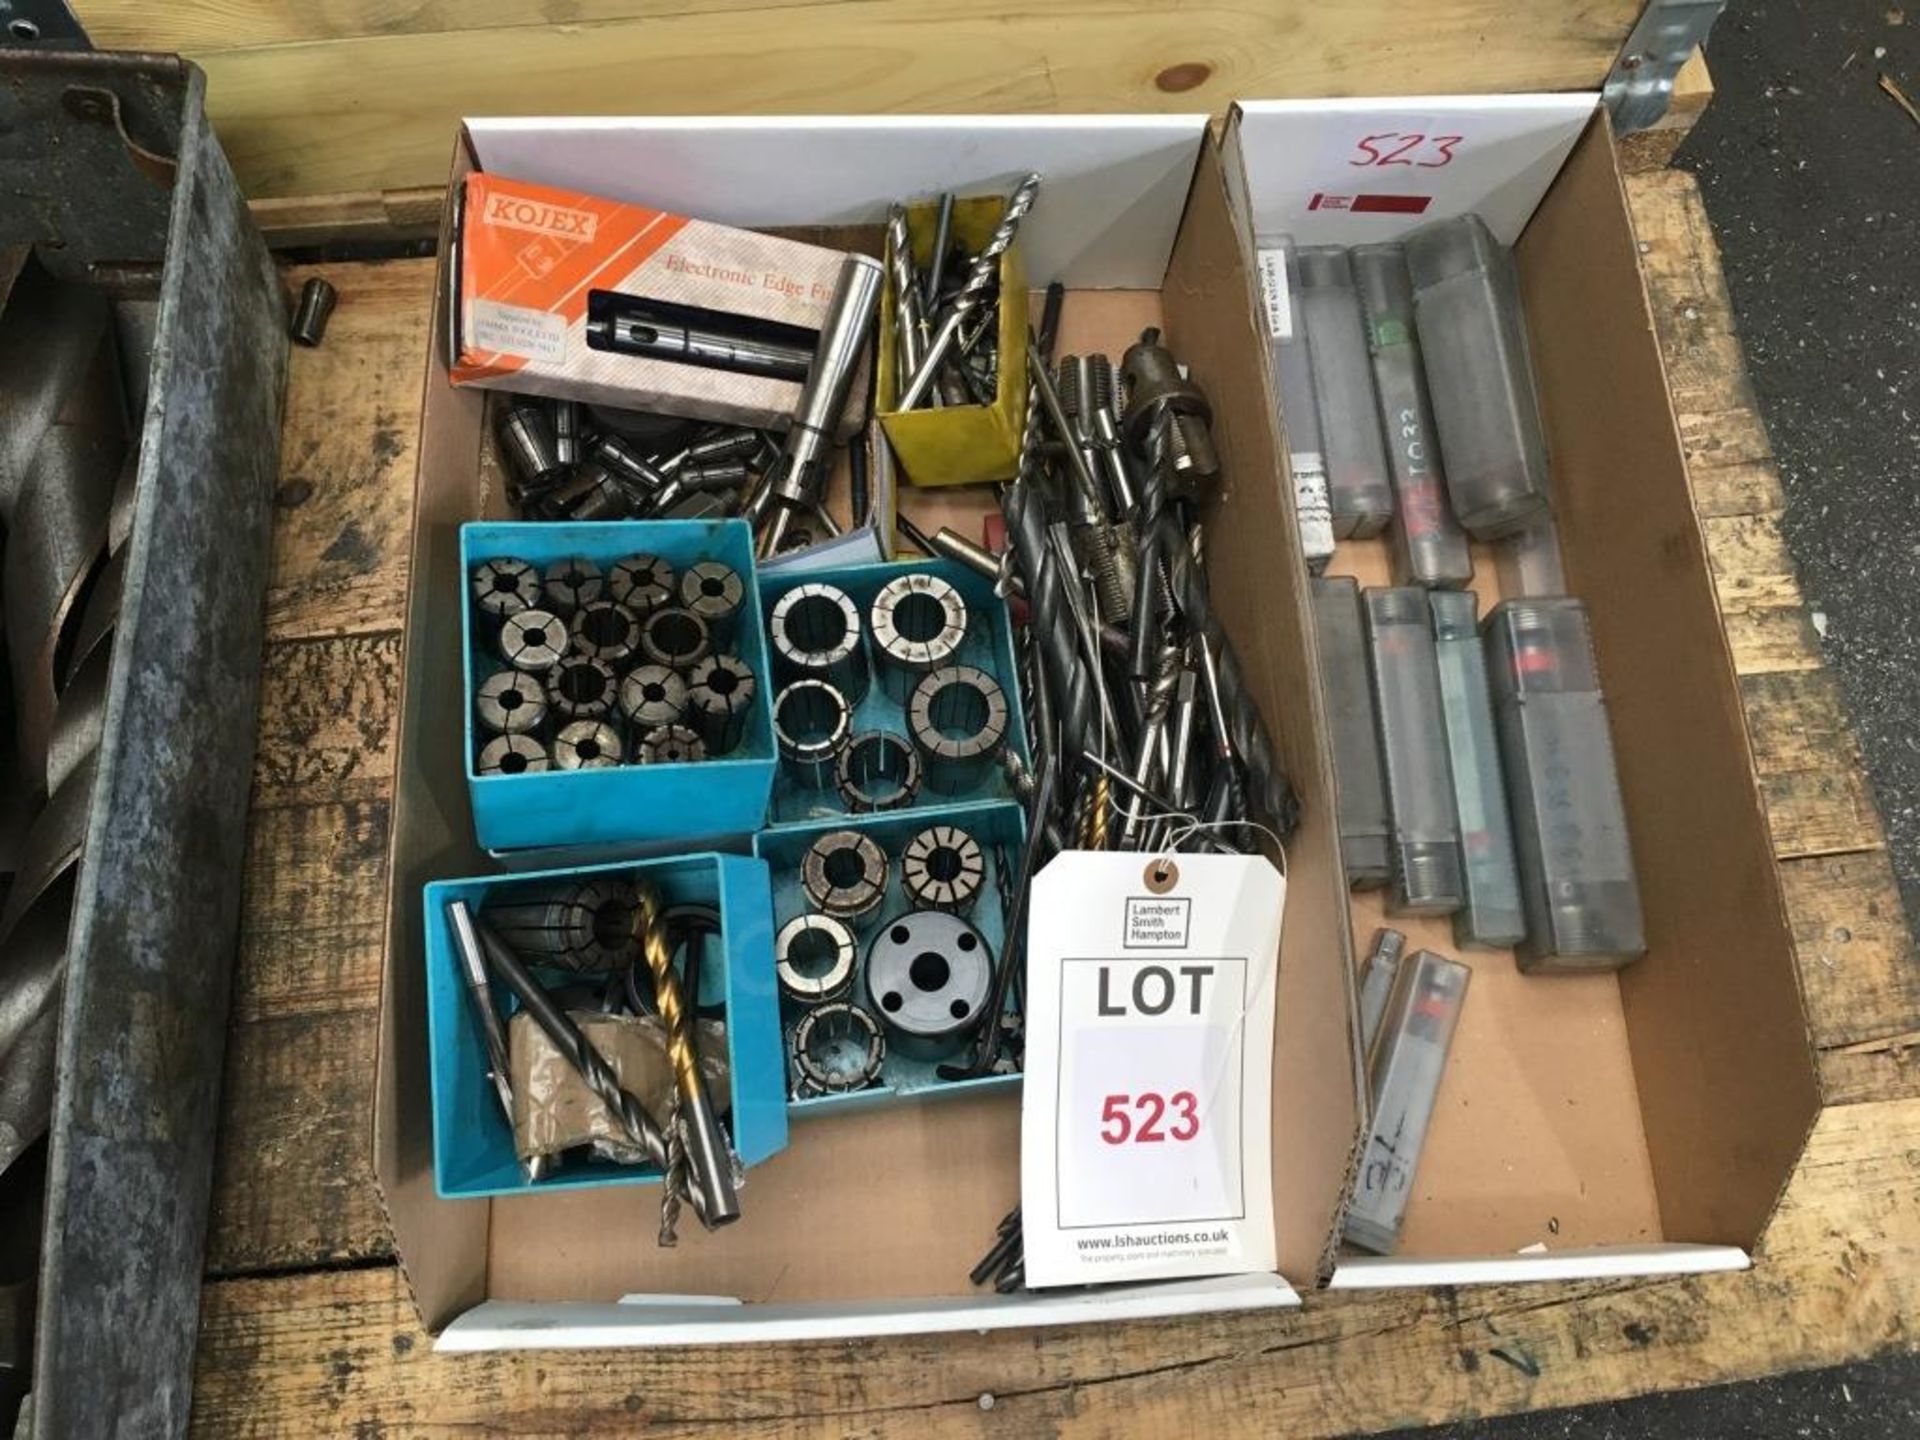 Assorted HSS twist drills, taps, collets, etc., as lotted, in two boxes